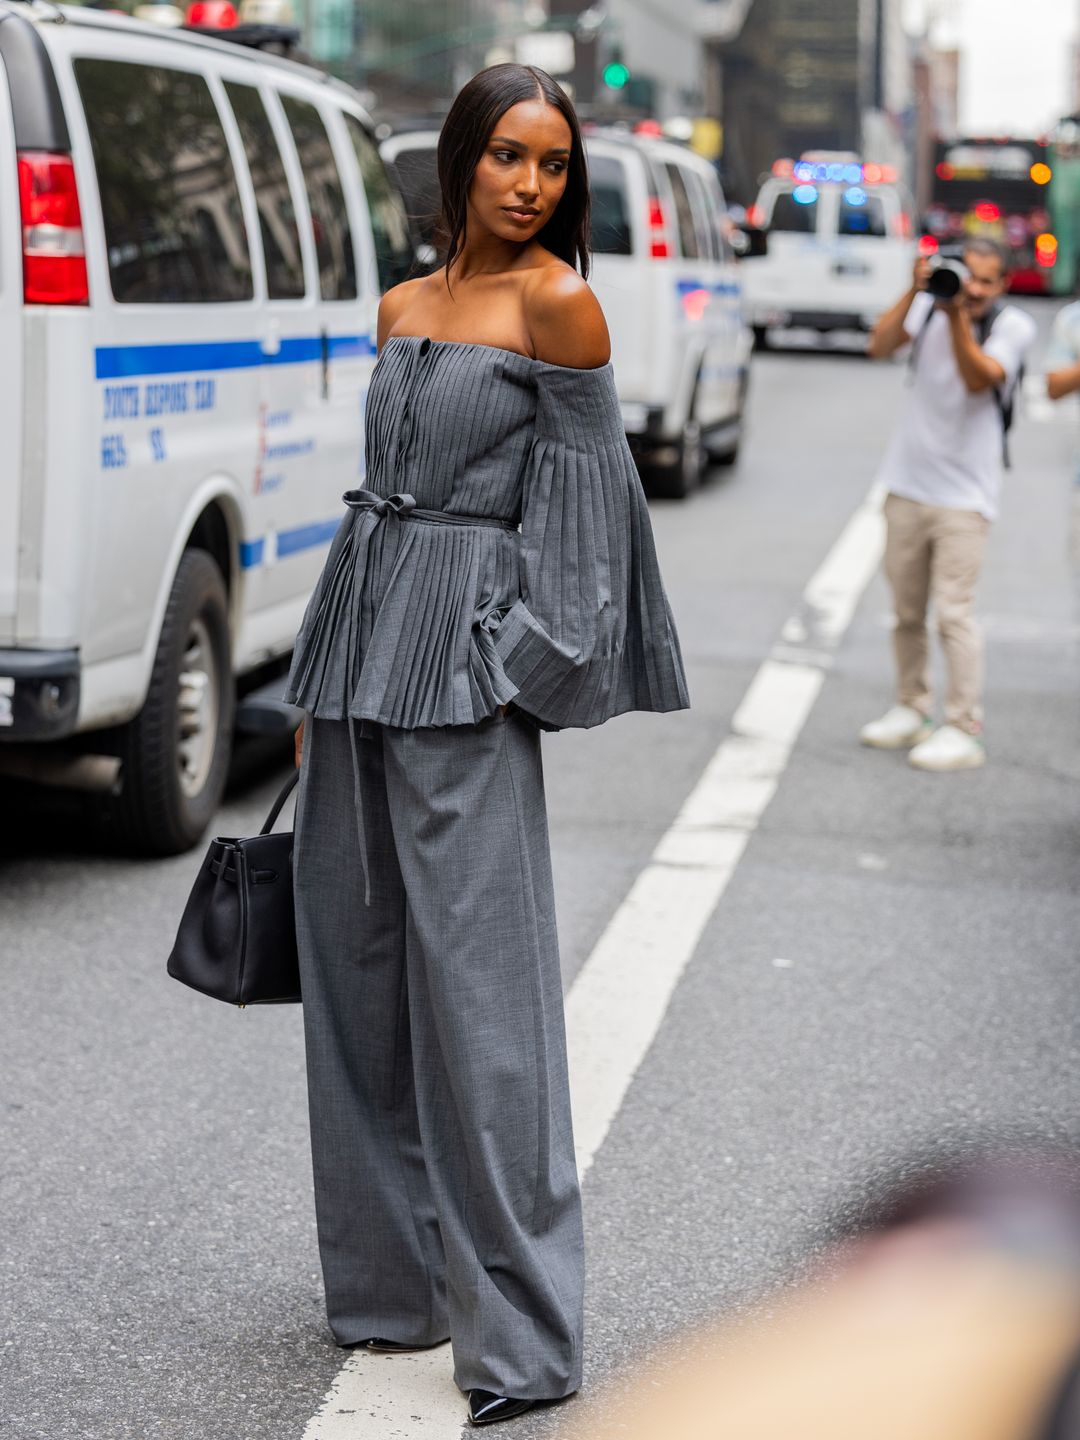 Jasmine Tookes wearing grey pleated top and trousers 